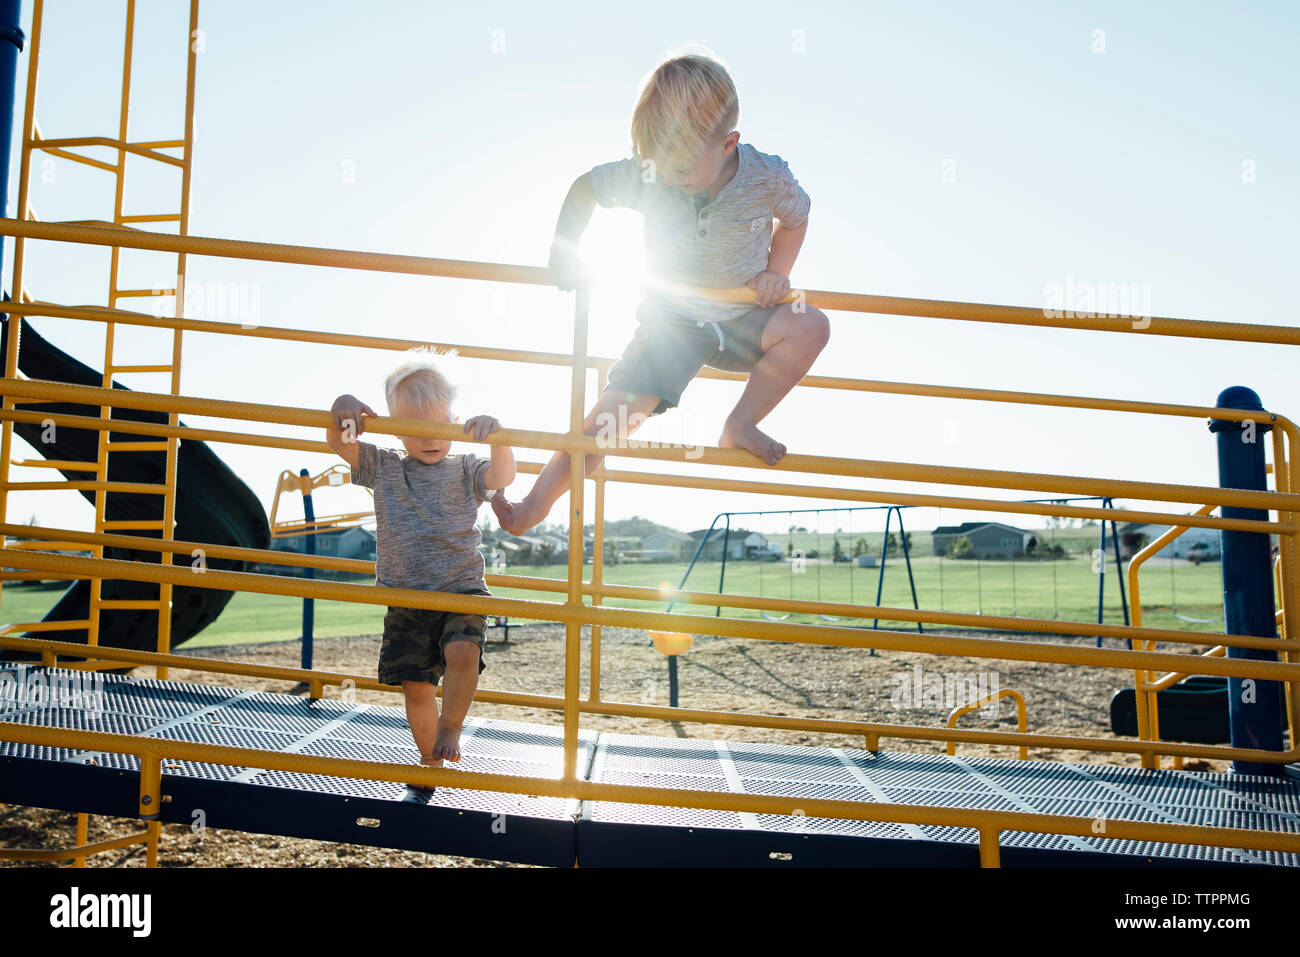 Boys playing on jungle gym at park Stock Photo